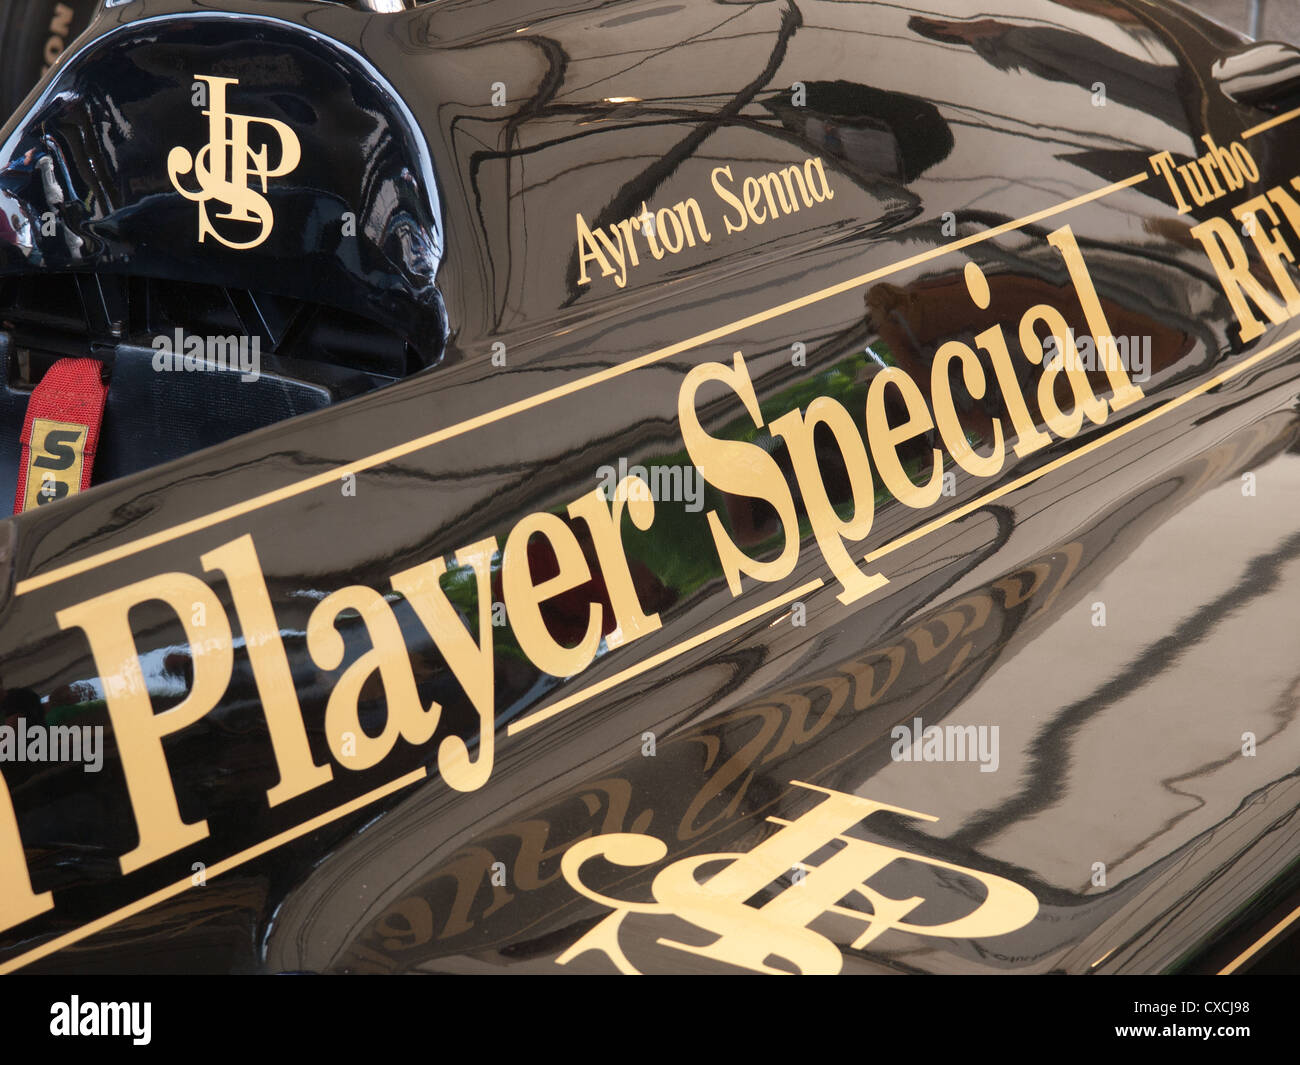 Aryton Senna's John Player Special Lotus F1 race car Goodwood Festival of Speed England UK 2012 Banque D'Images